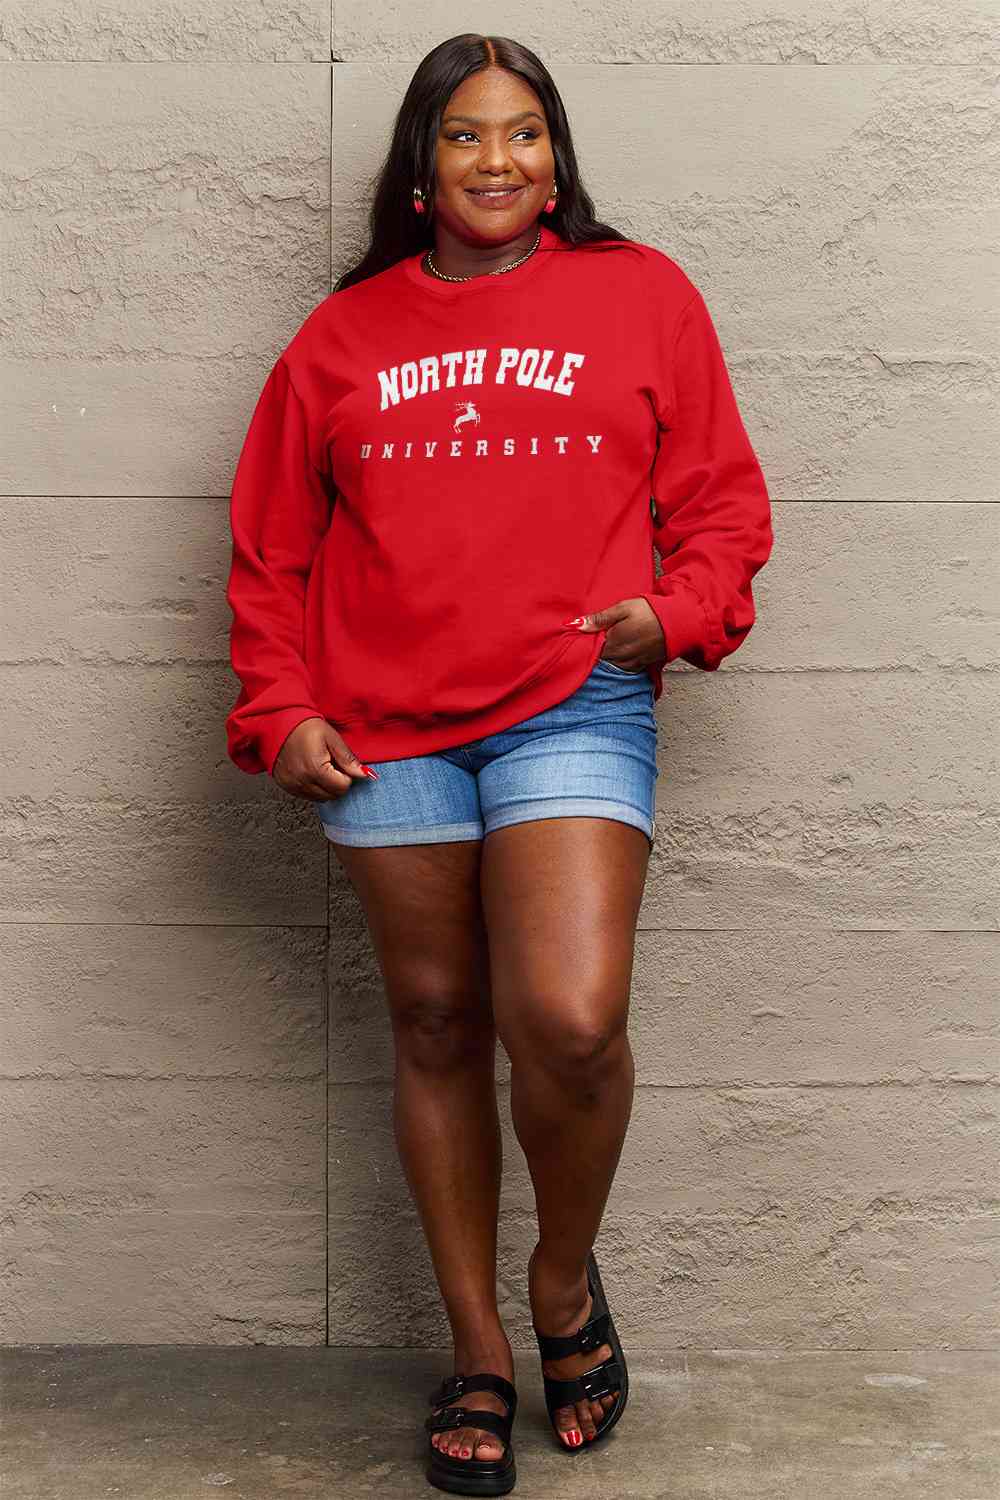 Rosy Brown Simply Love Full Size NORTH POLE UNIVERSITY Graphic Sweatshirt